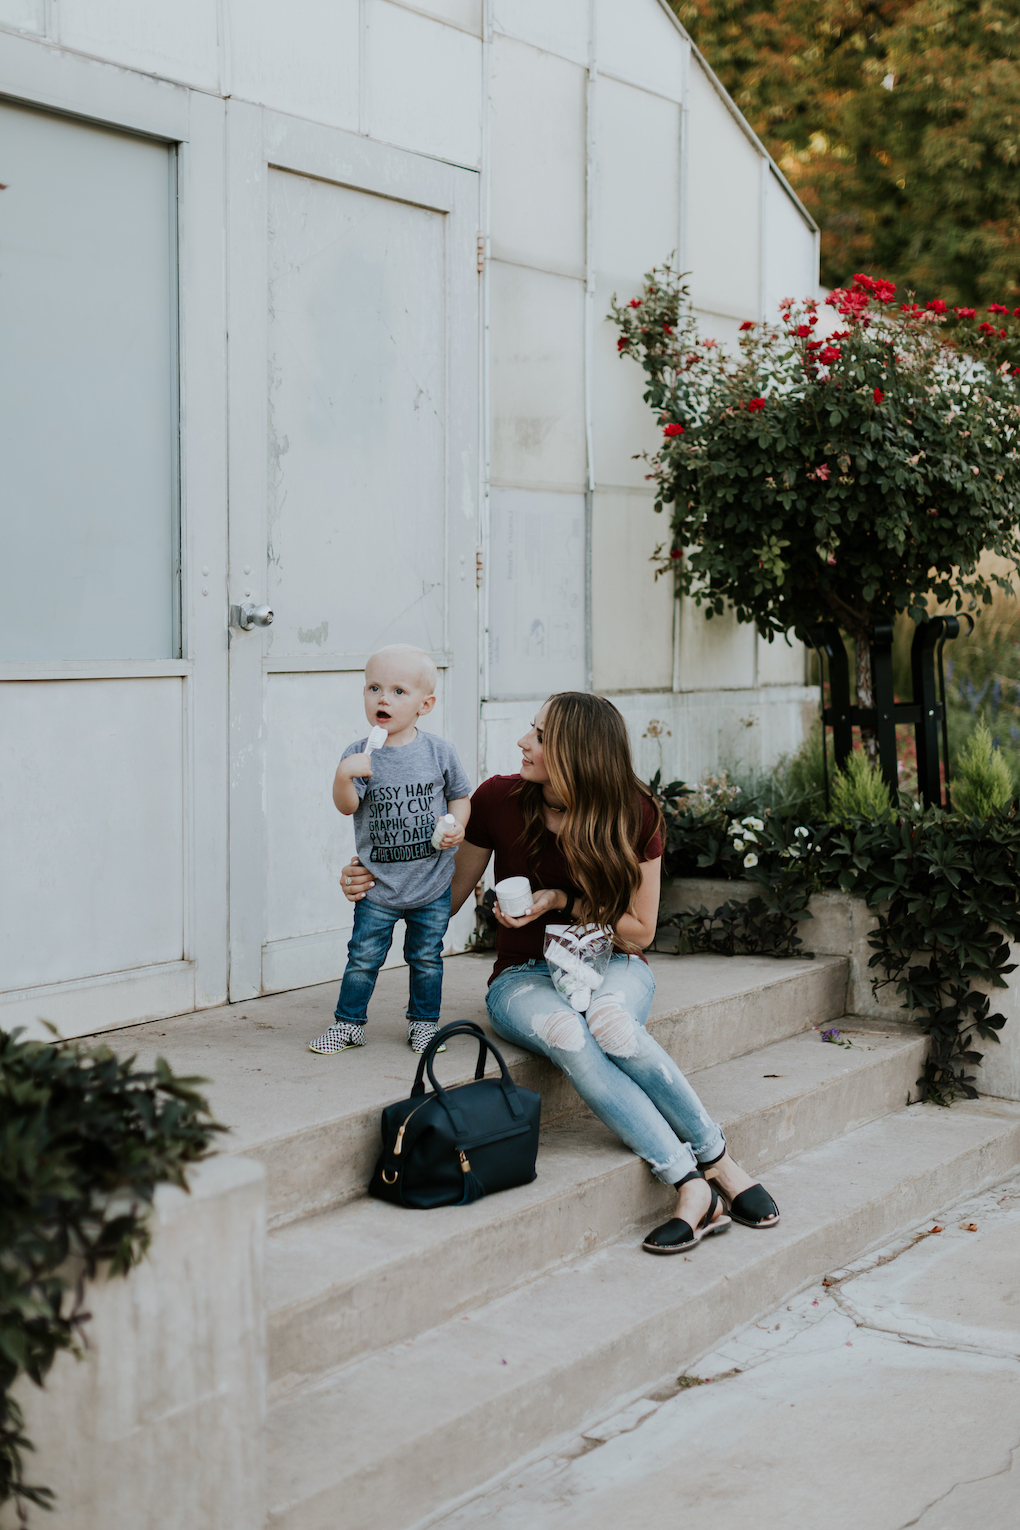 mom and little boy sitting on the stairs with baby pibu products little boy in graphic tee and jeans mom in distressed denim a maroon top and a navy handbag